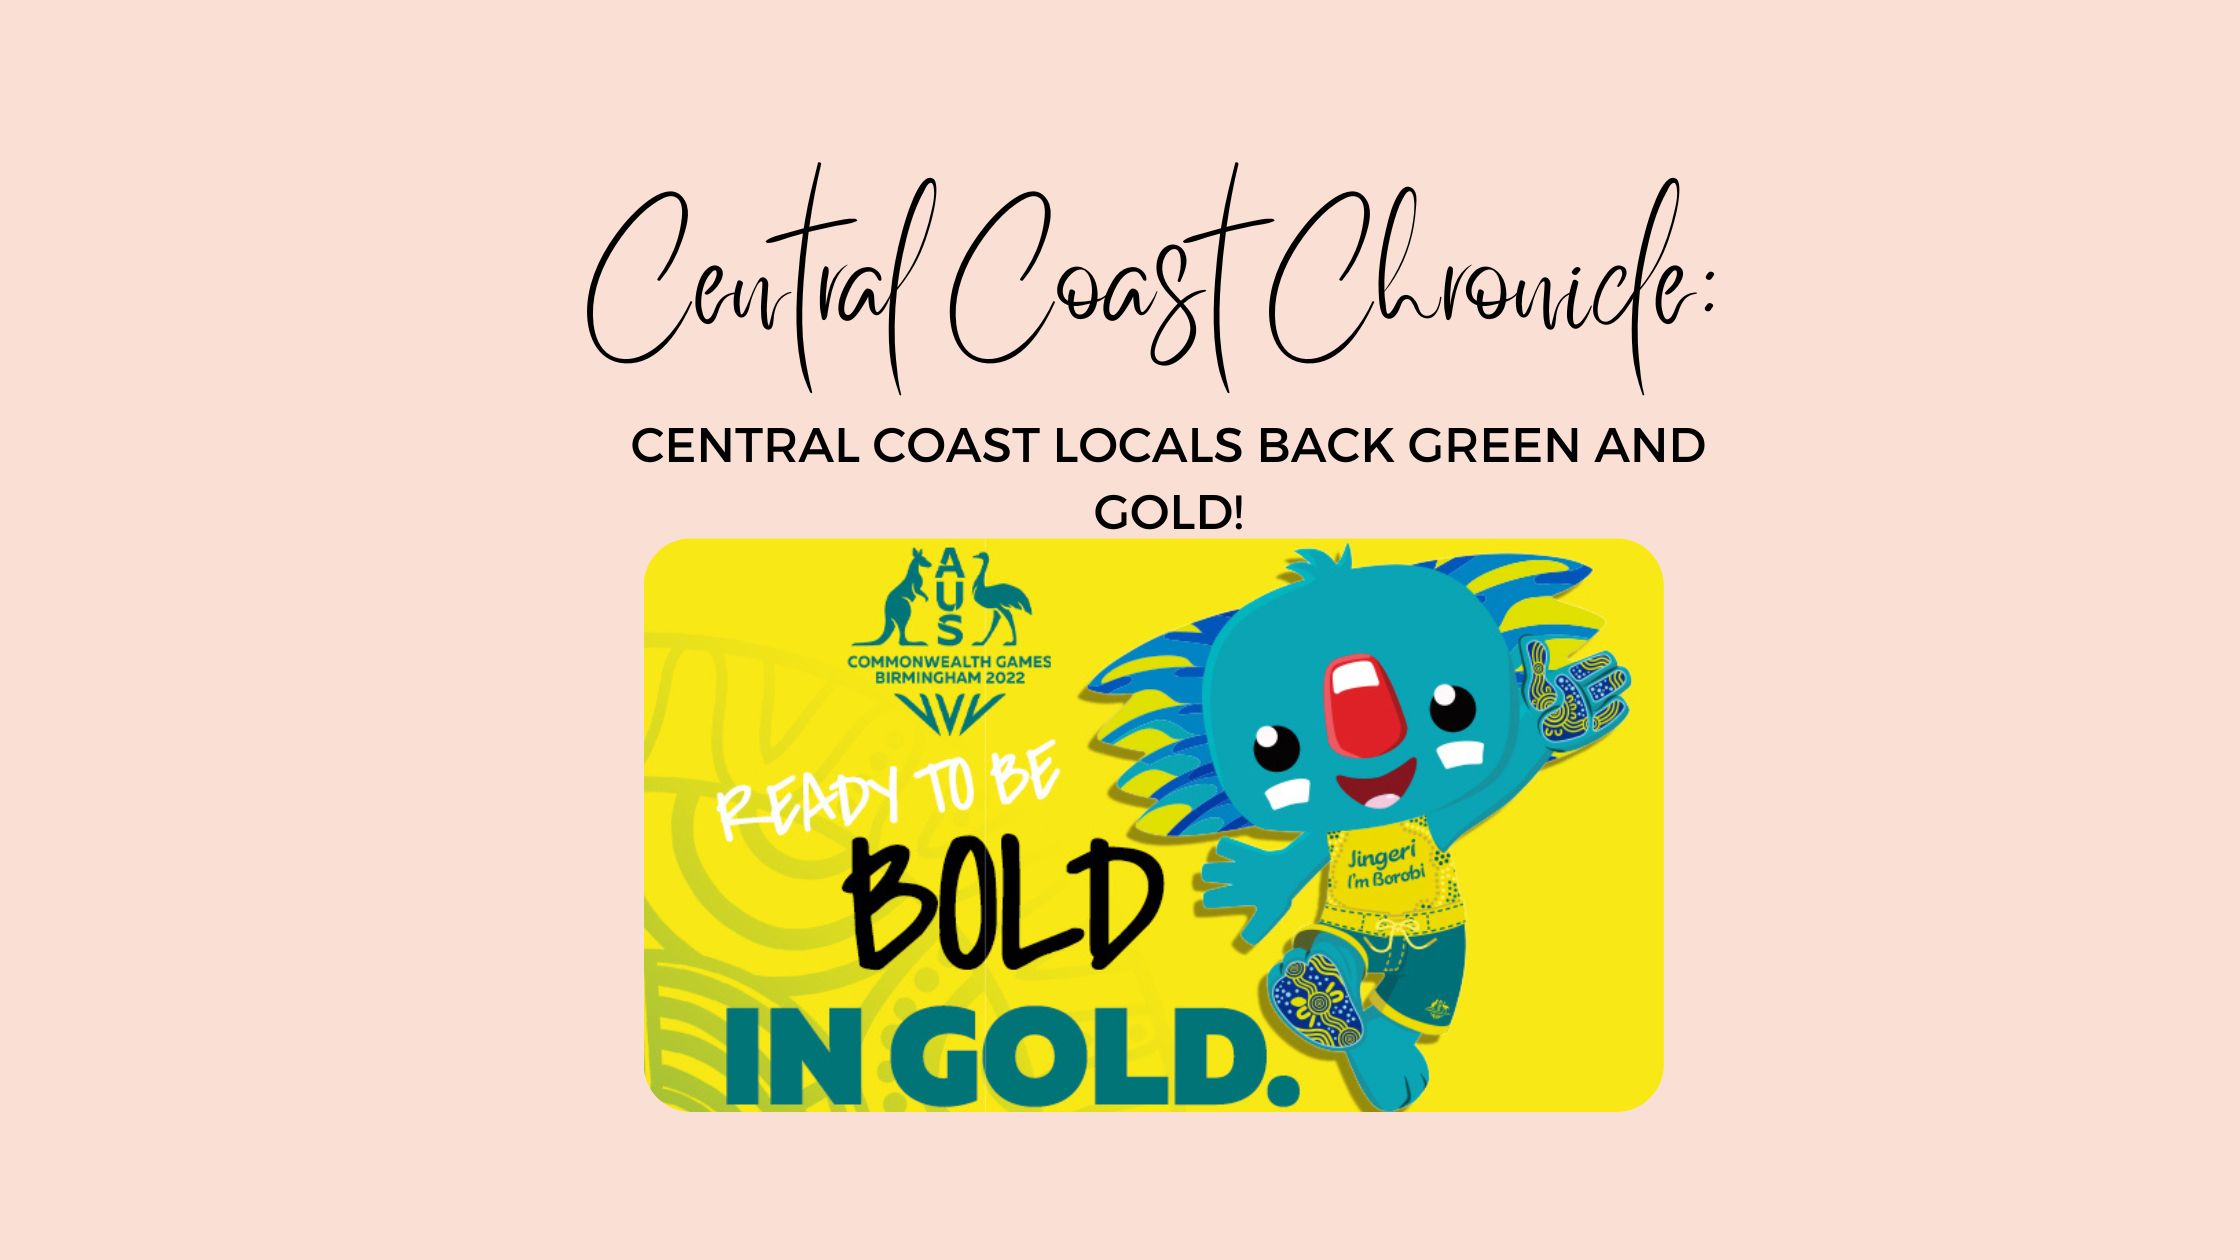 CENTRAL COAST LOCALS BACK GREEN AND GOLD!